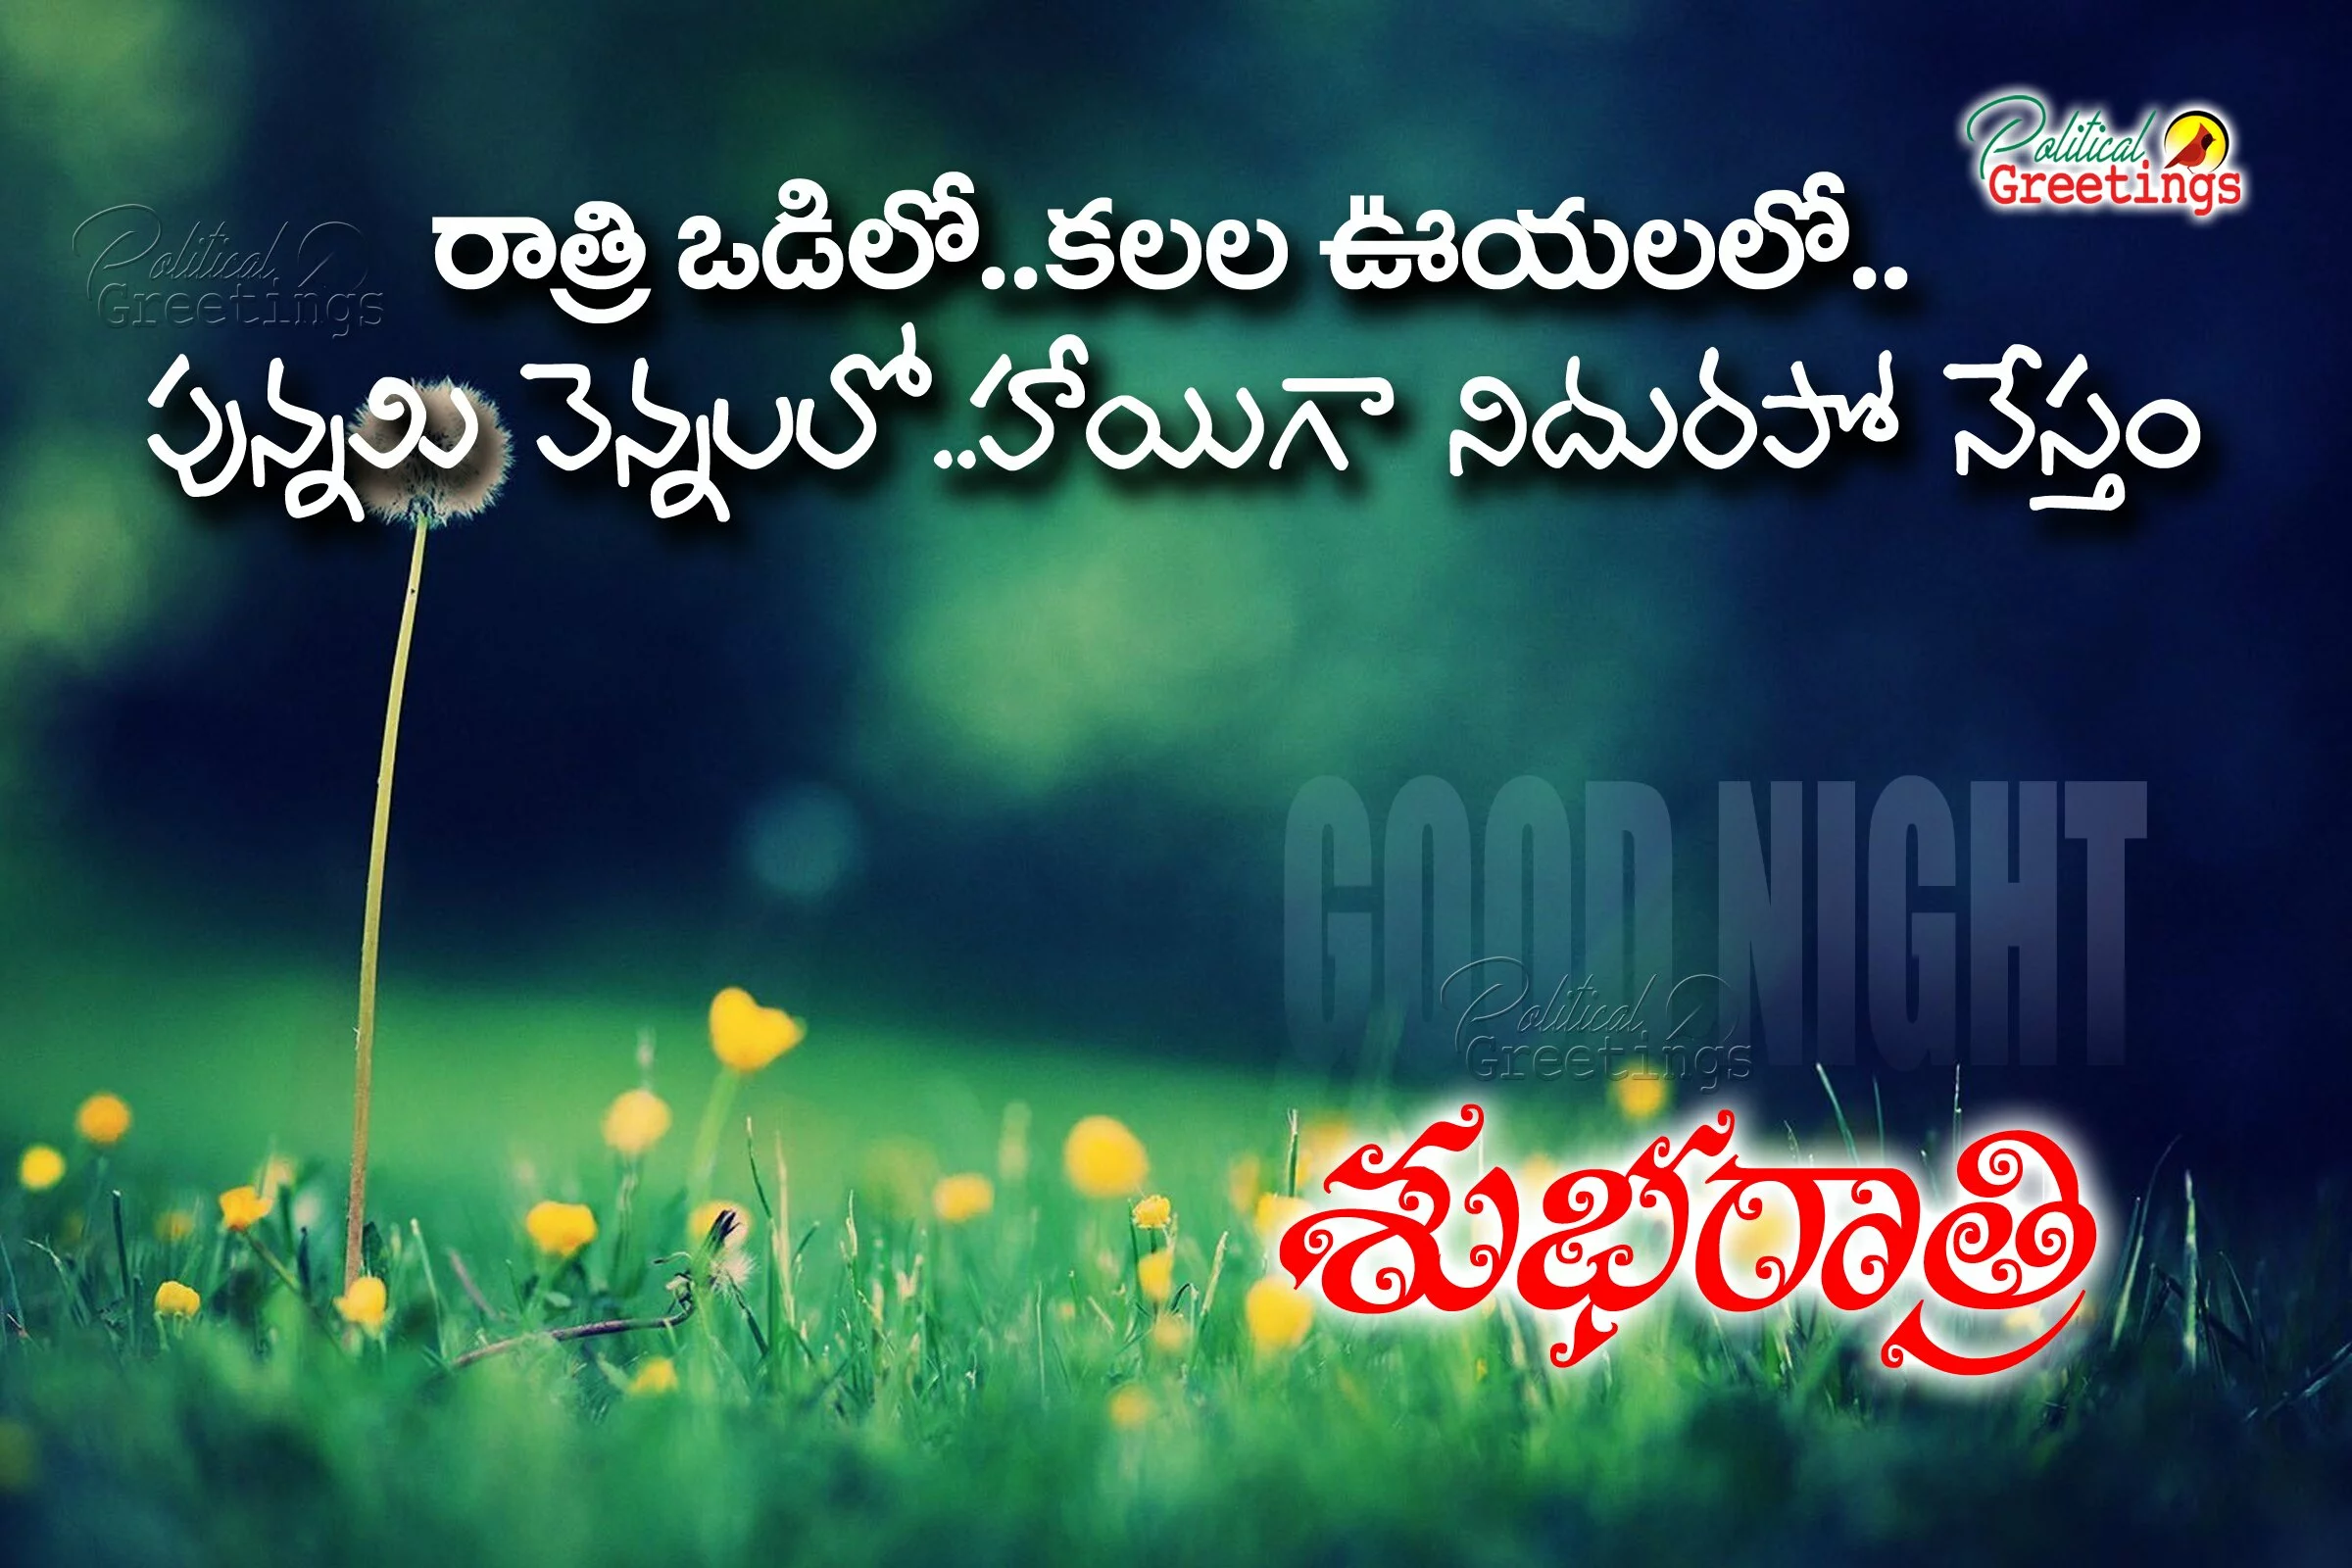 Best Telugu Good Night Wishes Quotes Messages pics